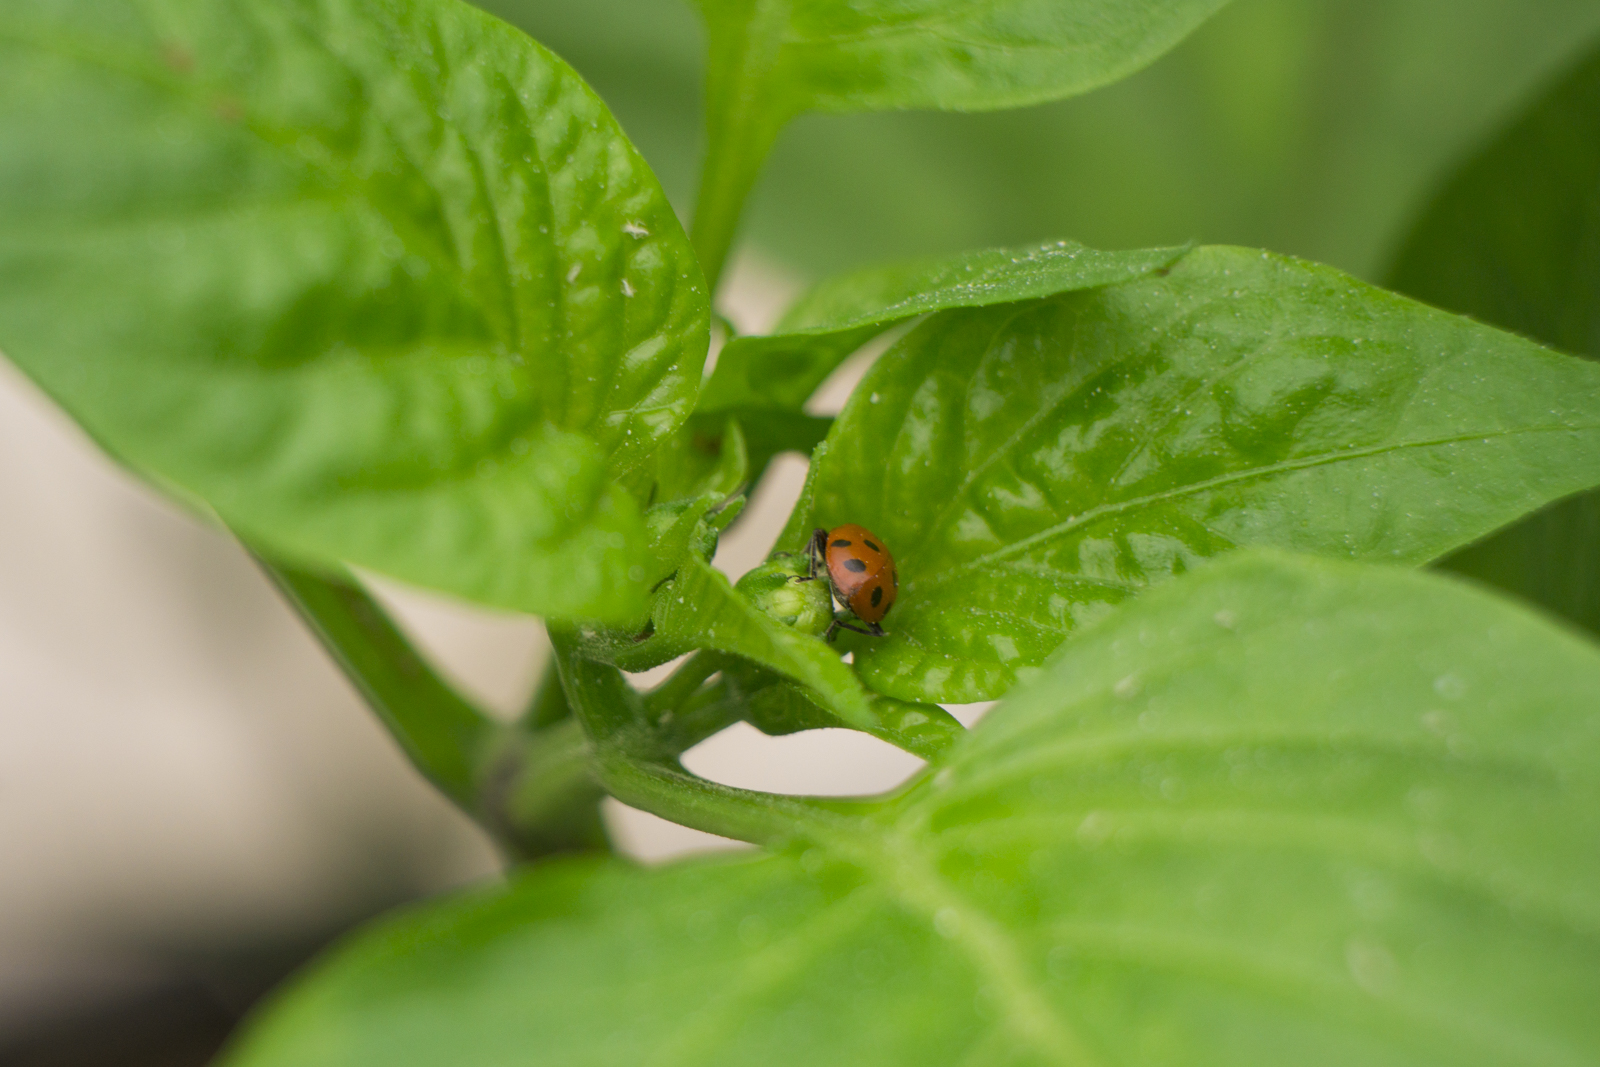 A ladybug in the crop